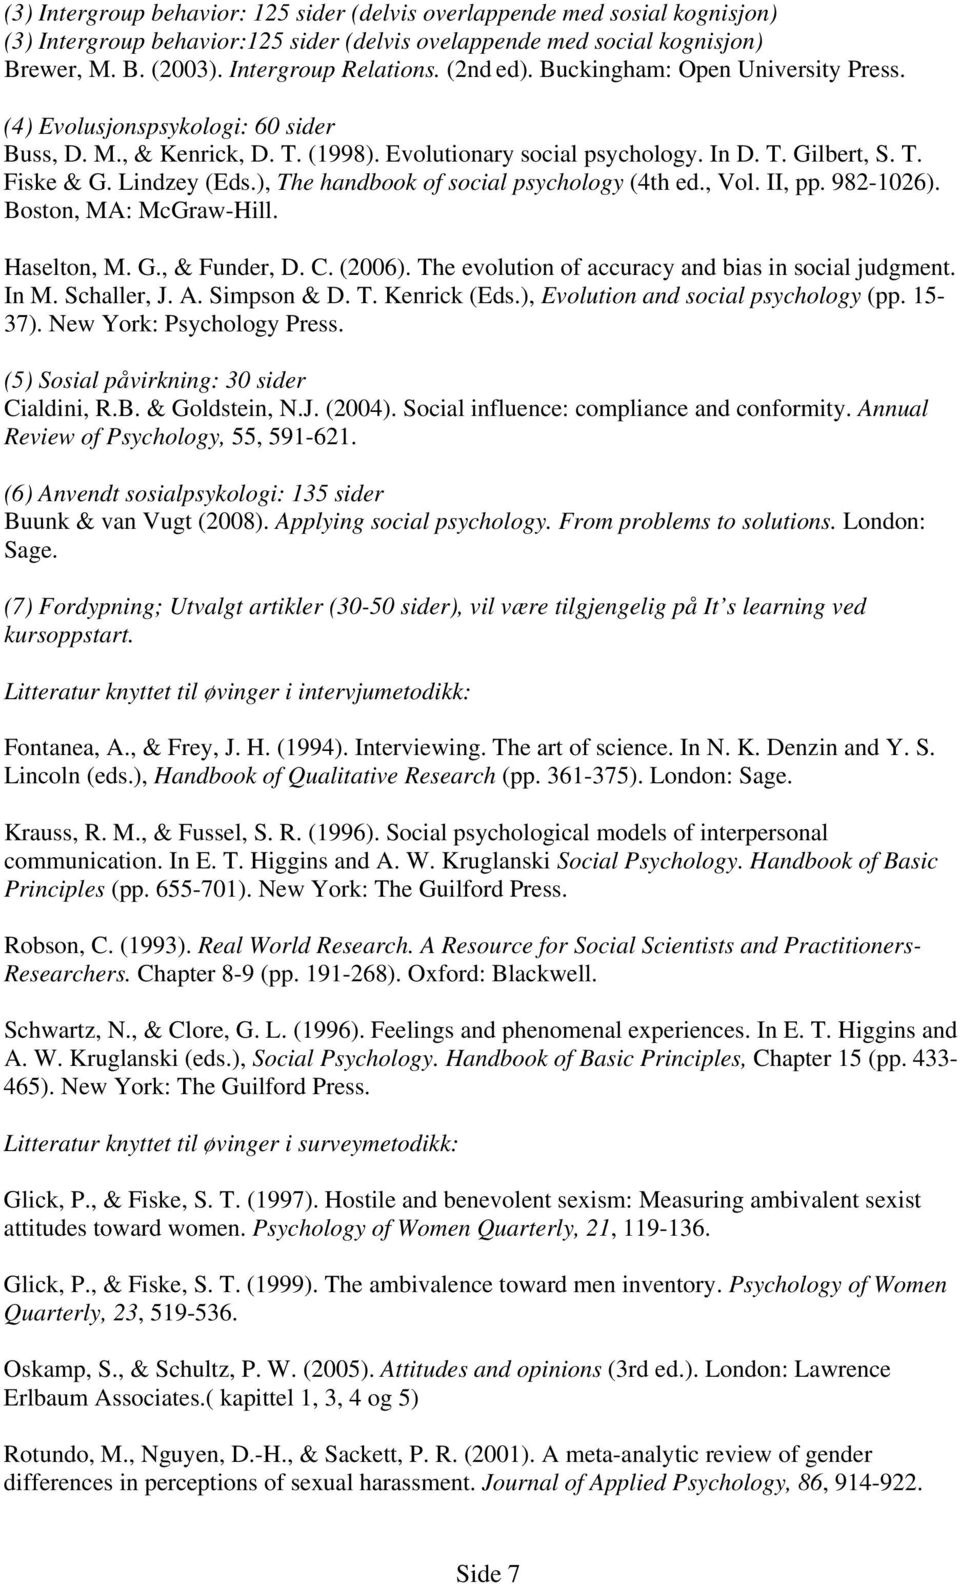 ), The handbook of social psychology (4th ed., Vol. II, pp. 982-1026). Boston, MA: McGraw-Hill. Haselton, M. G., & Funder, D. C. (2006). The evolution of accuracy and bias in social judgment. In M.